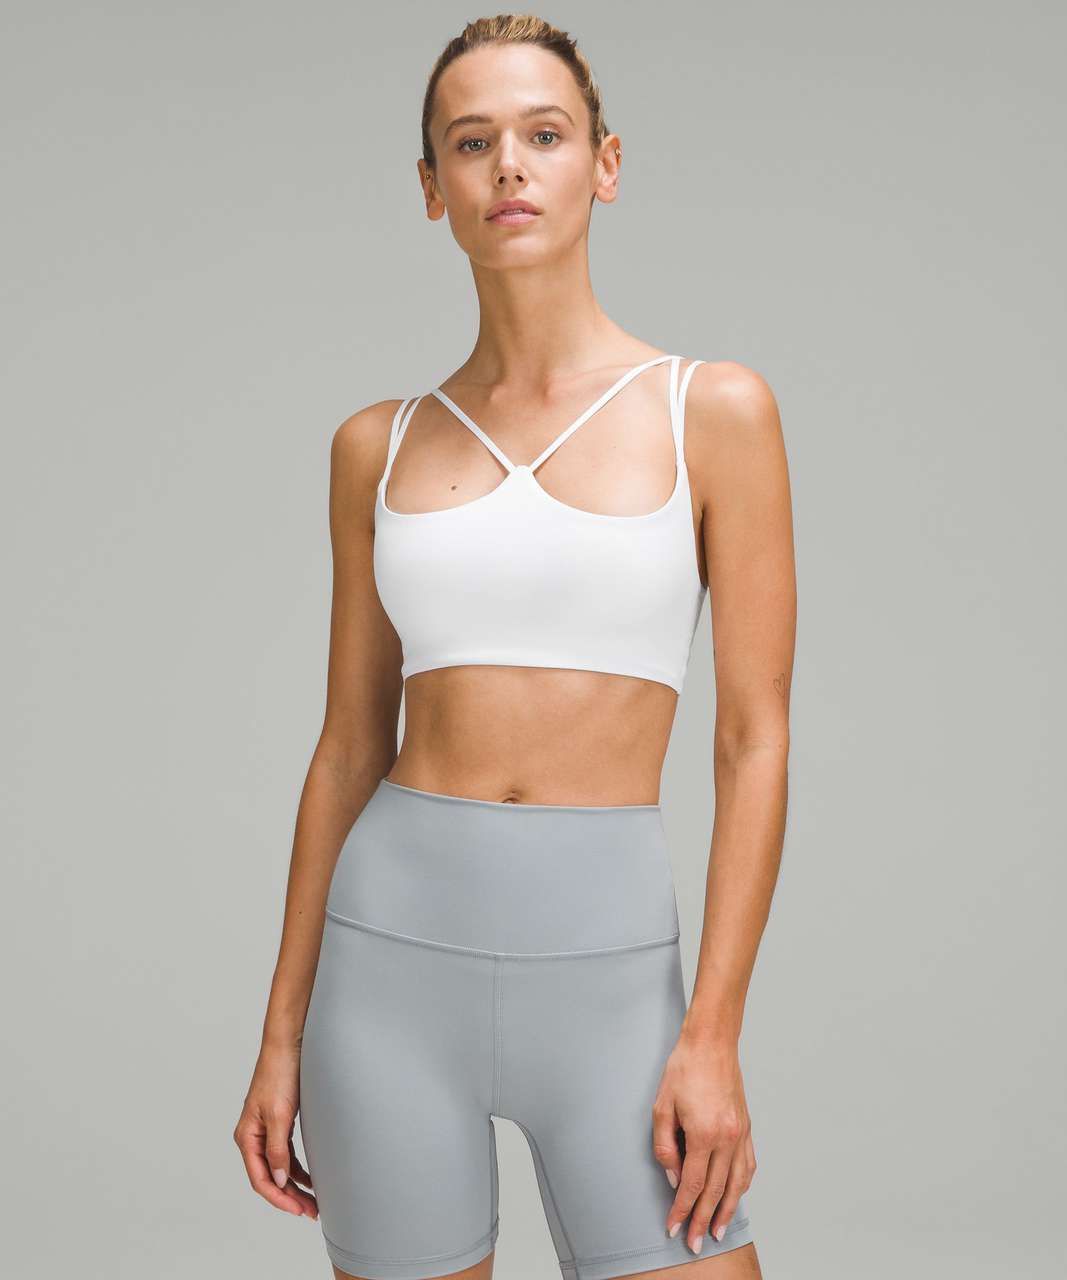 Lululemon Nulu Strappy Yoga Bra *Light Support, A/B Cup - White